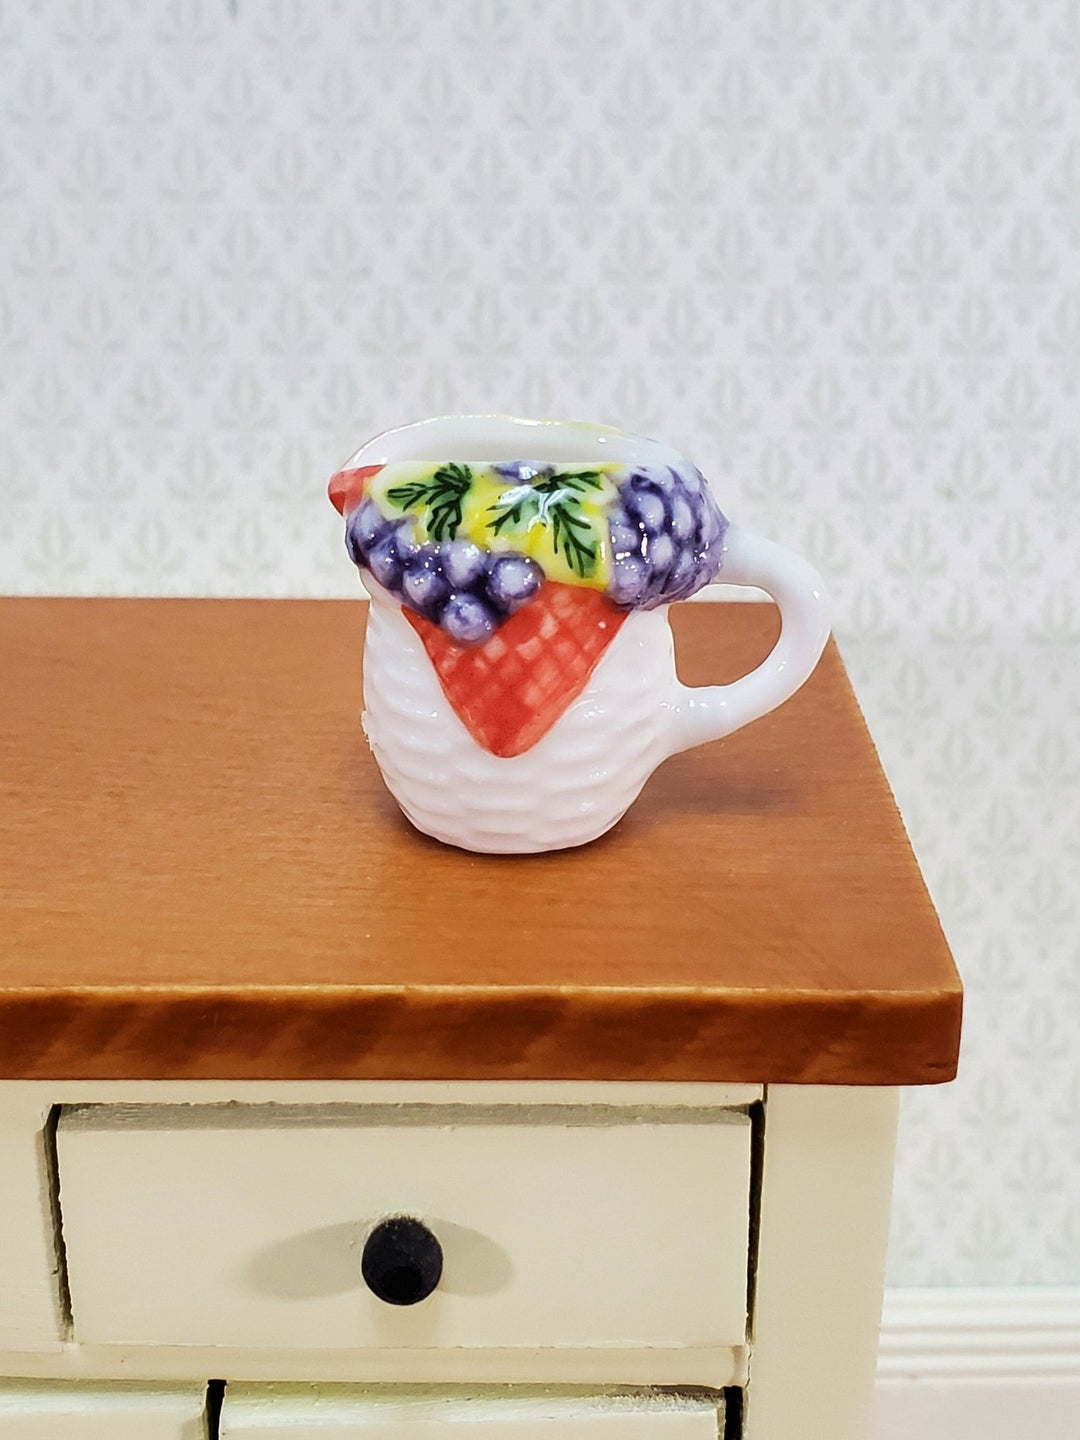 Dollhouse Ceramic Pitcher with Handle Fruit Motif 1:12 Scale by Falcon Miniatures - Miniature Crush